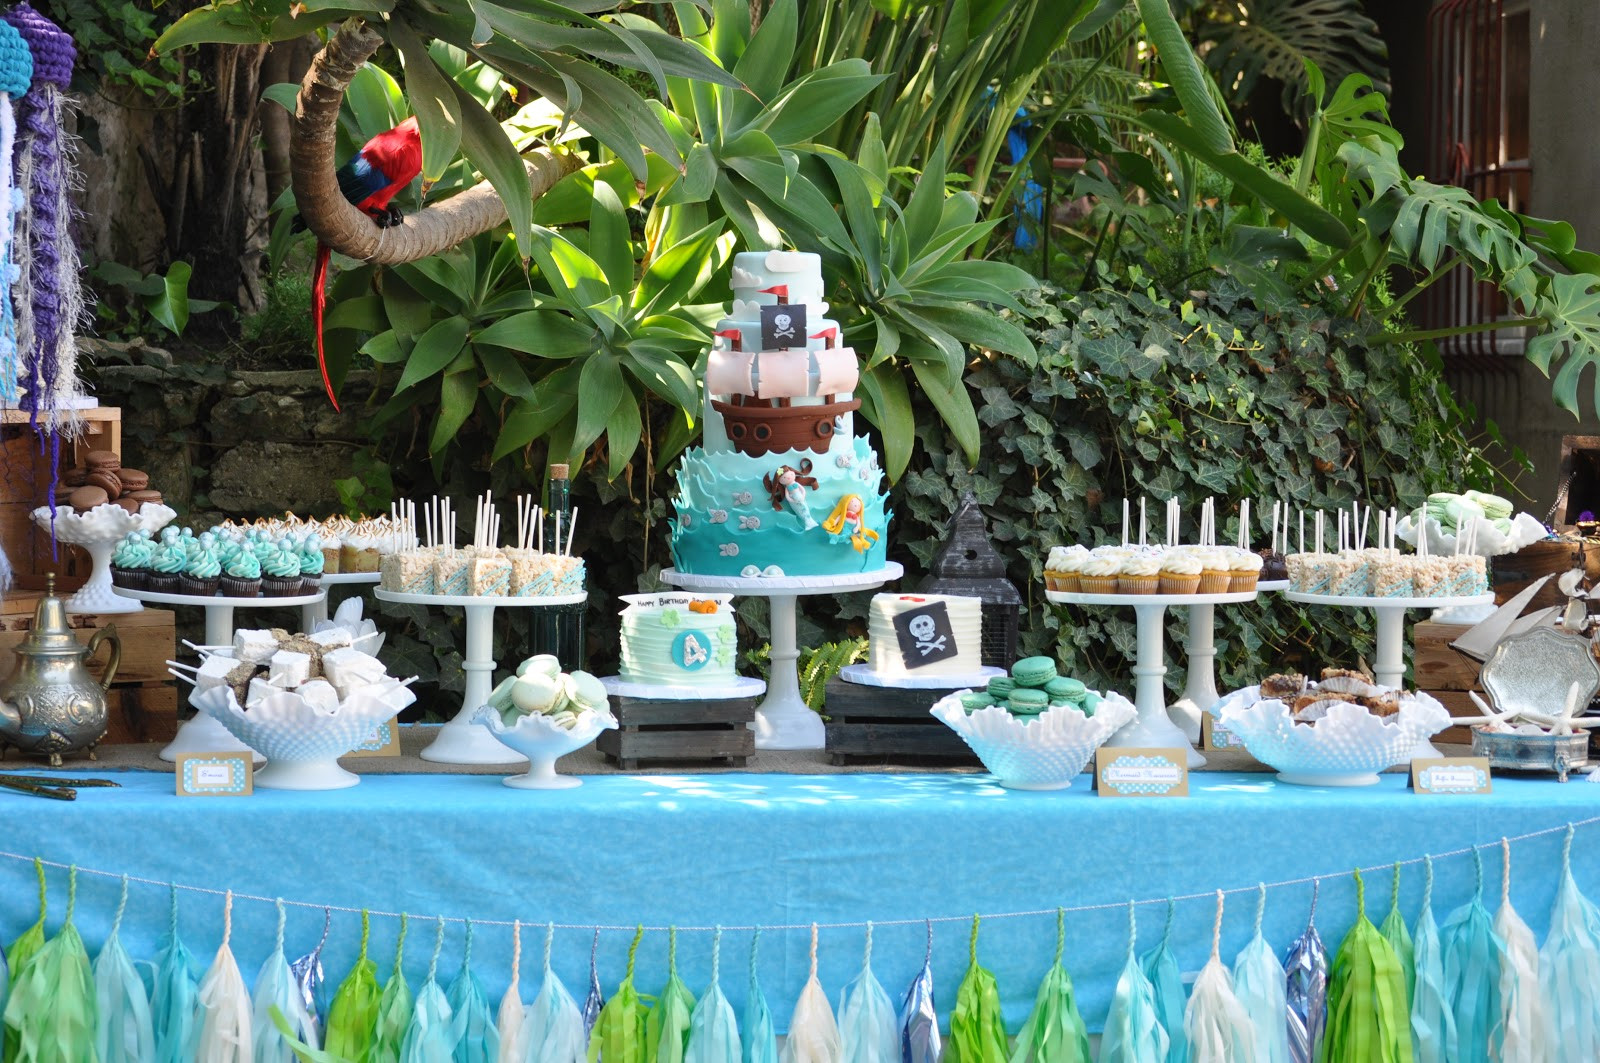 Mermaid And Pirate Party Ideas
 A Pirate and Mermaid Party